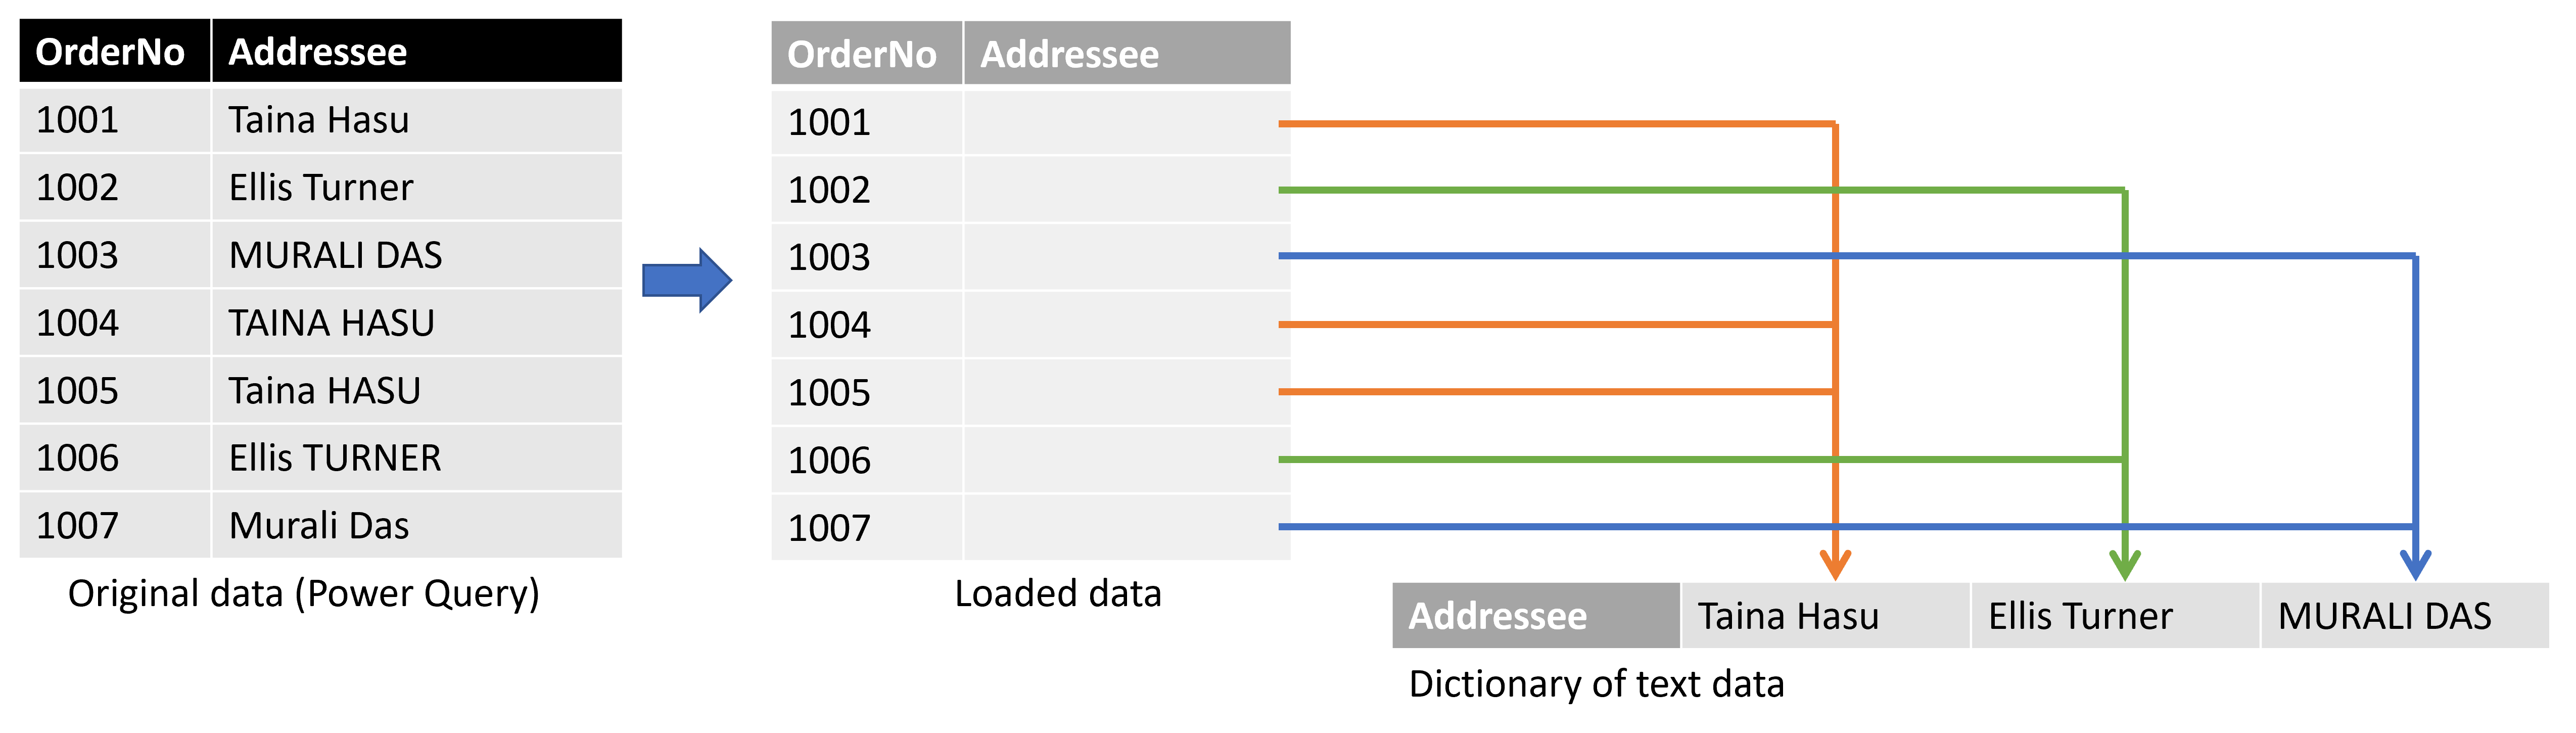 Diagram that shows the data load process and mapping text values to a dictionary of unique values.